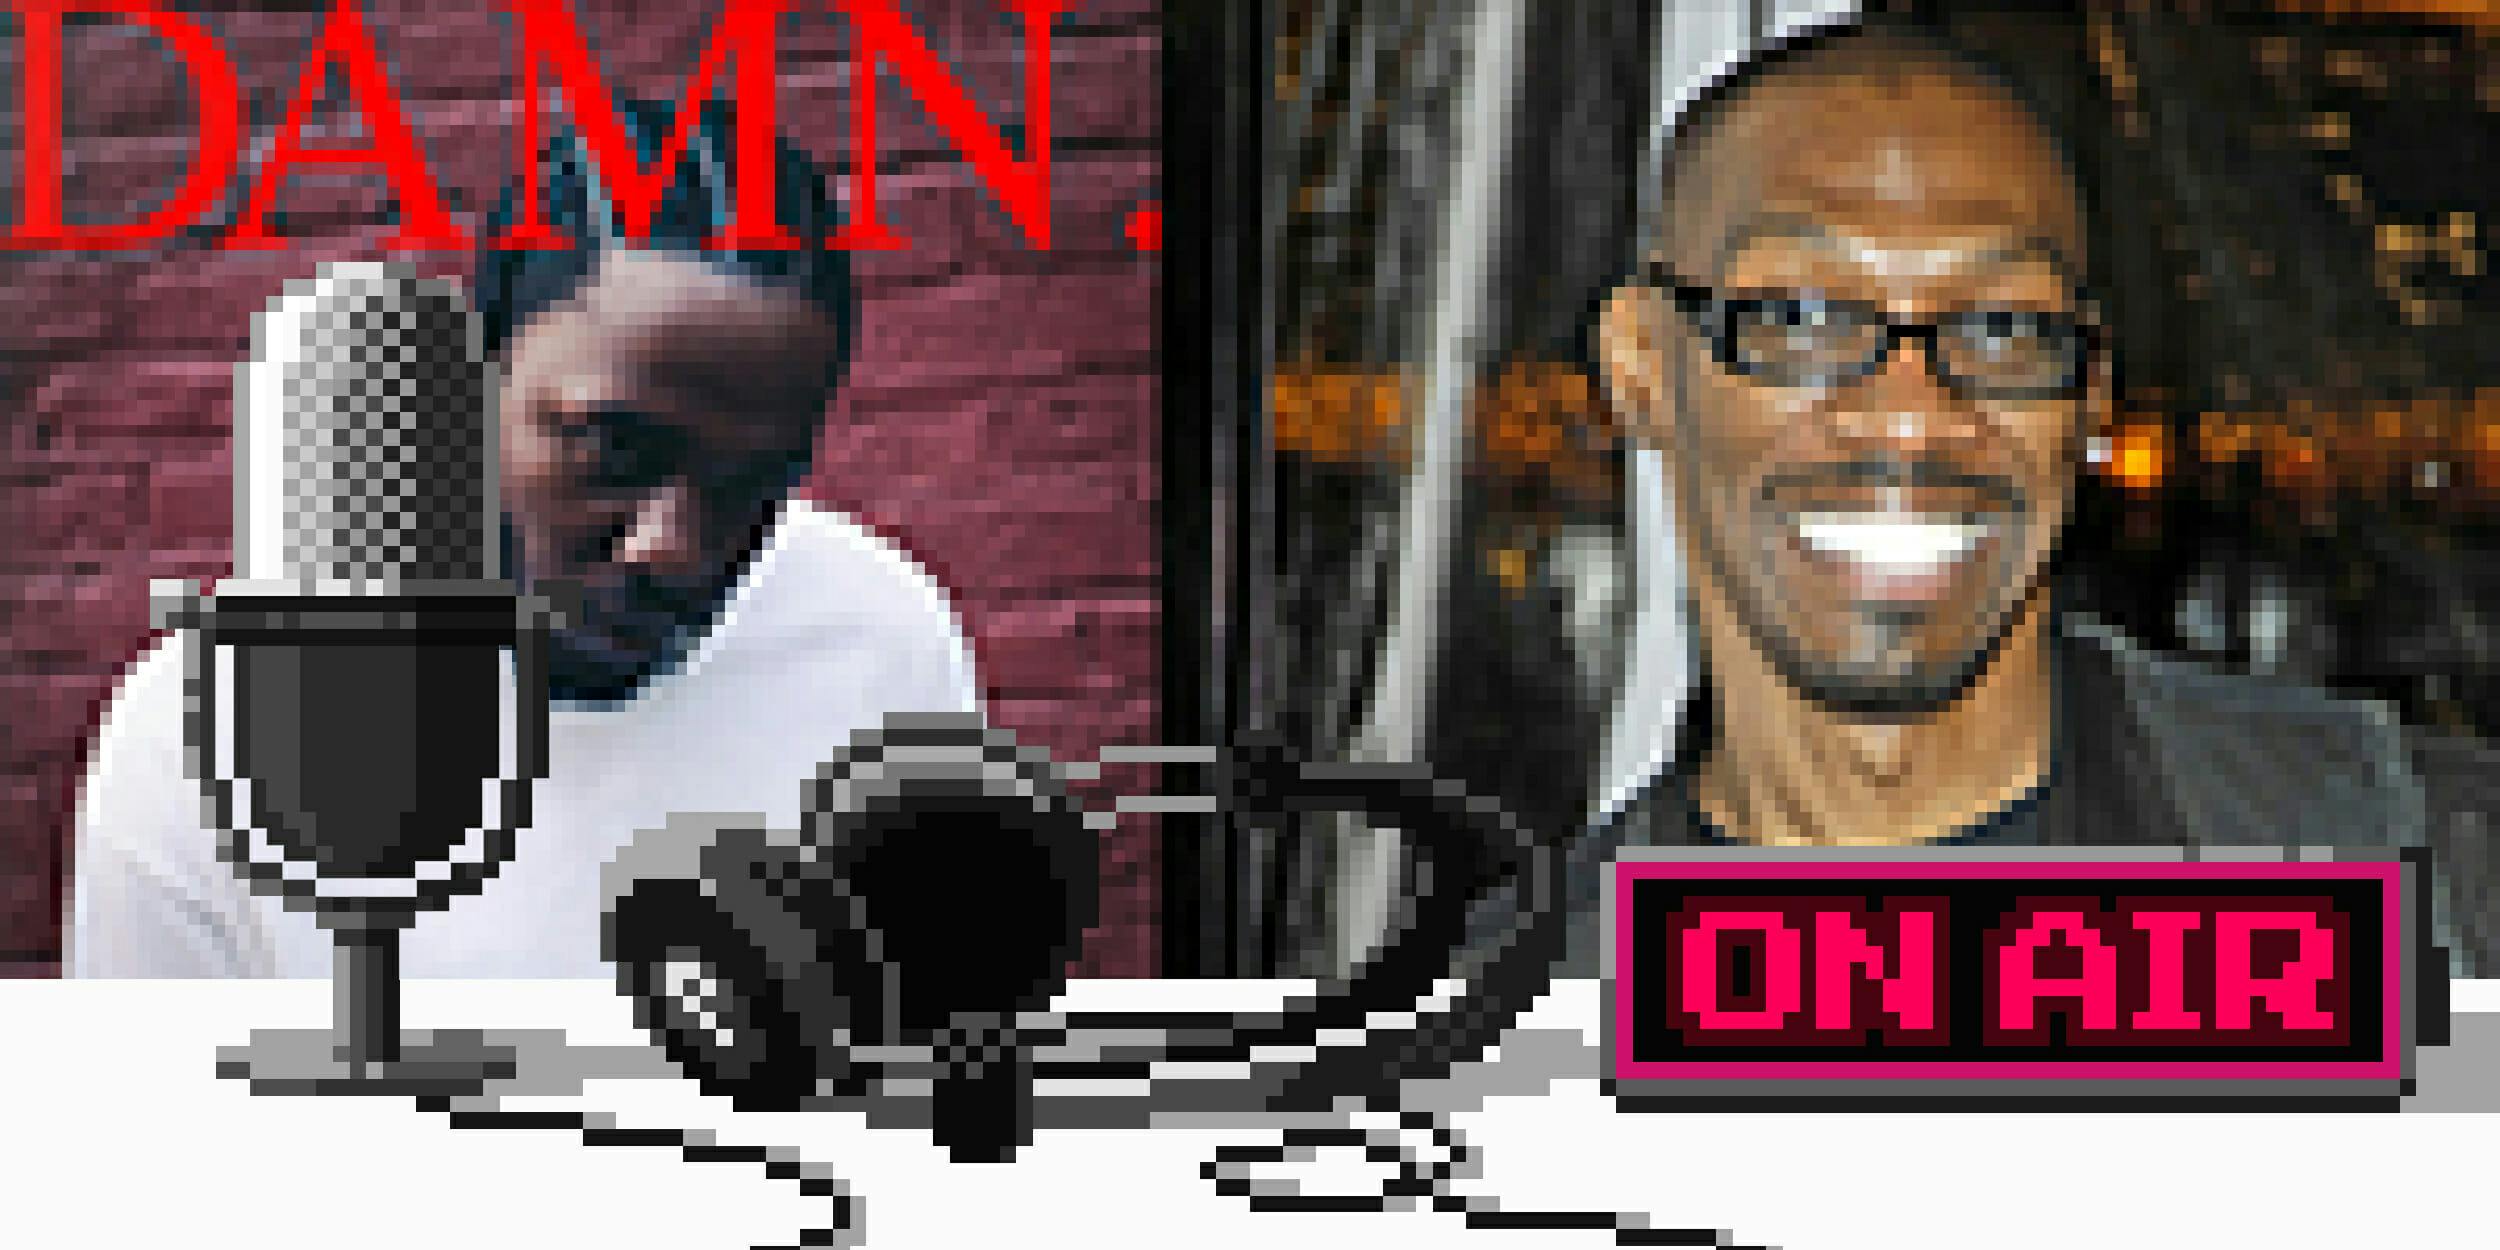 Upstream podcast discusses Charlie Murphy and Kendrick Lamar